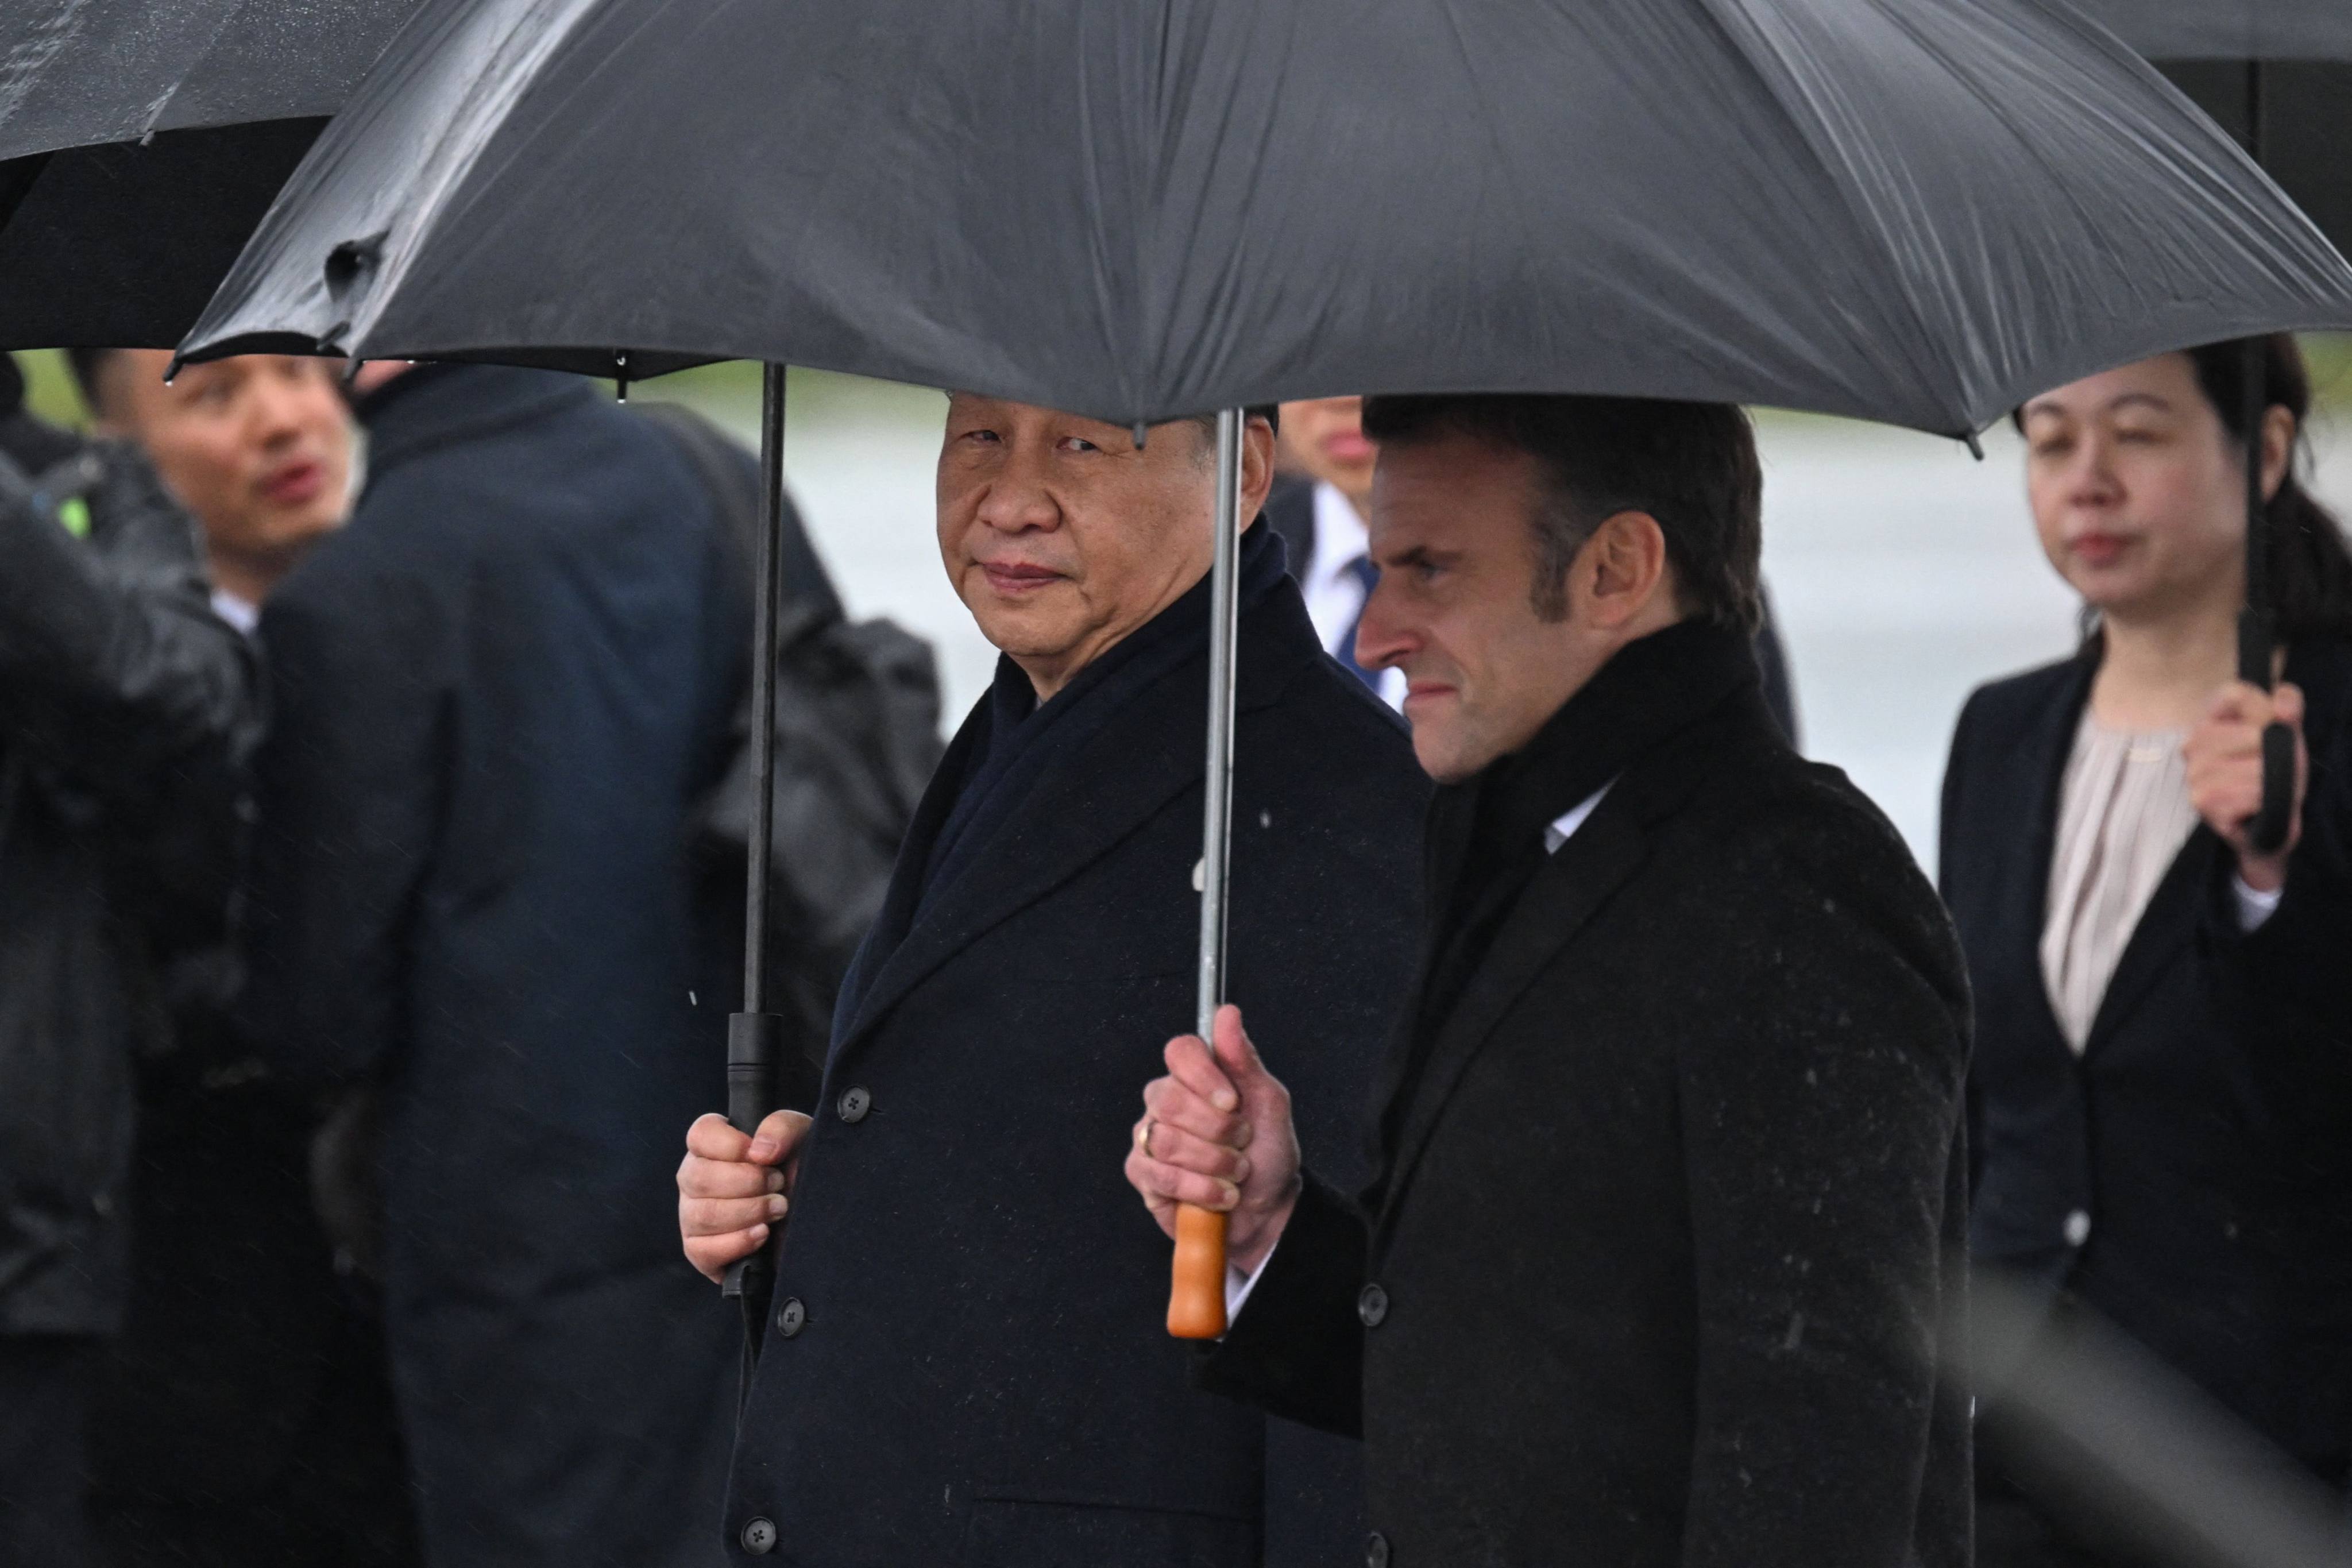 Chinese President Xi Jinping and French President Emmanuel Macron at Tarbes airport in southwestern France on Tuesday. Photo: AFP